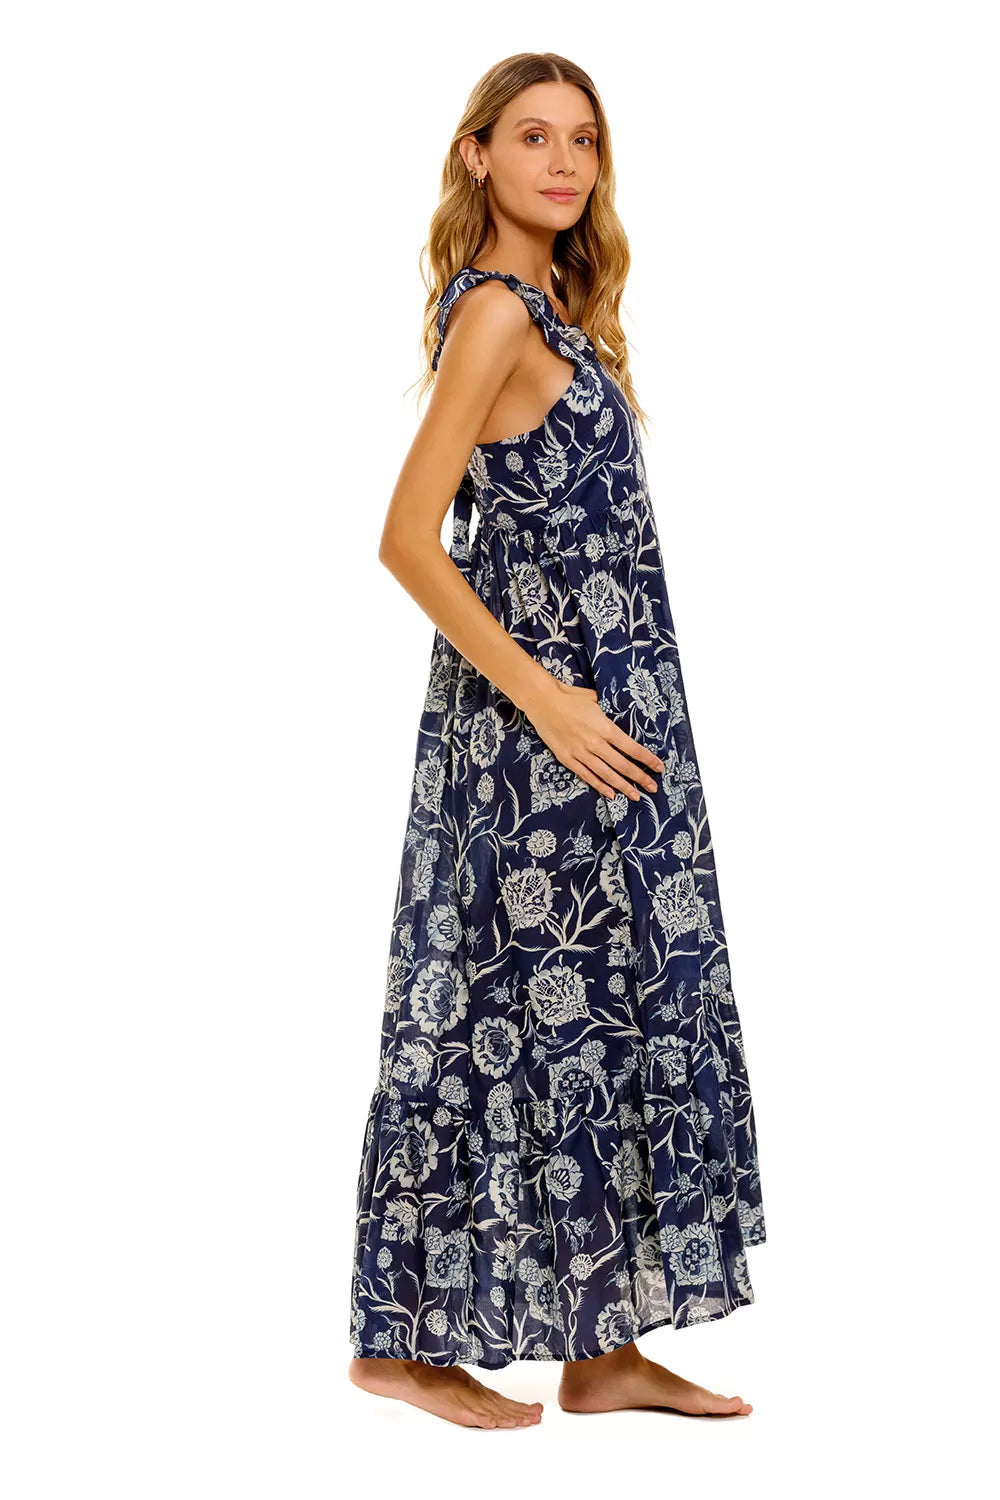 Maxi navy dress with all over floral print ruffle straps square neckline and tie back with elasticated backline and deep ruffle hem